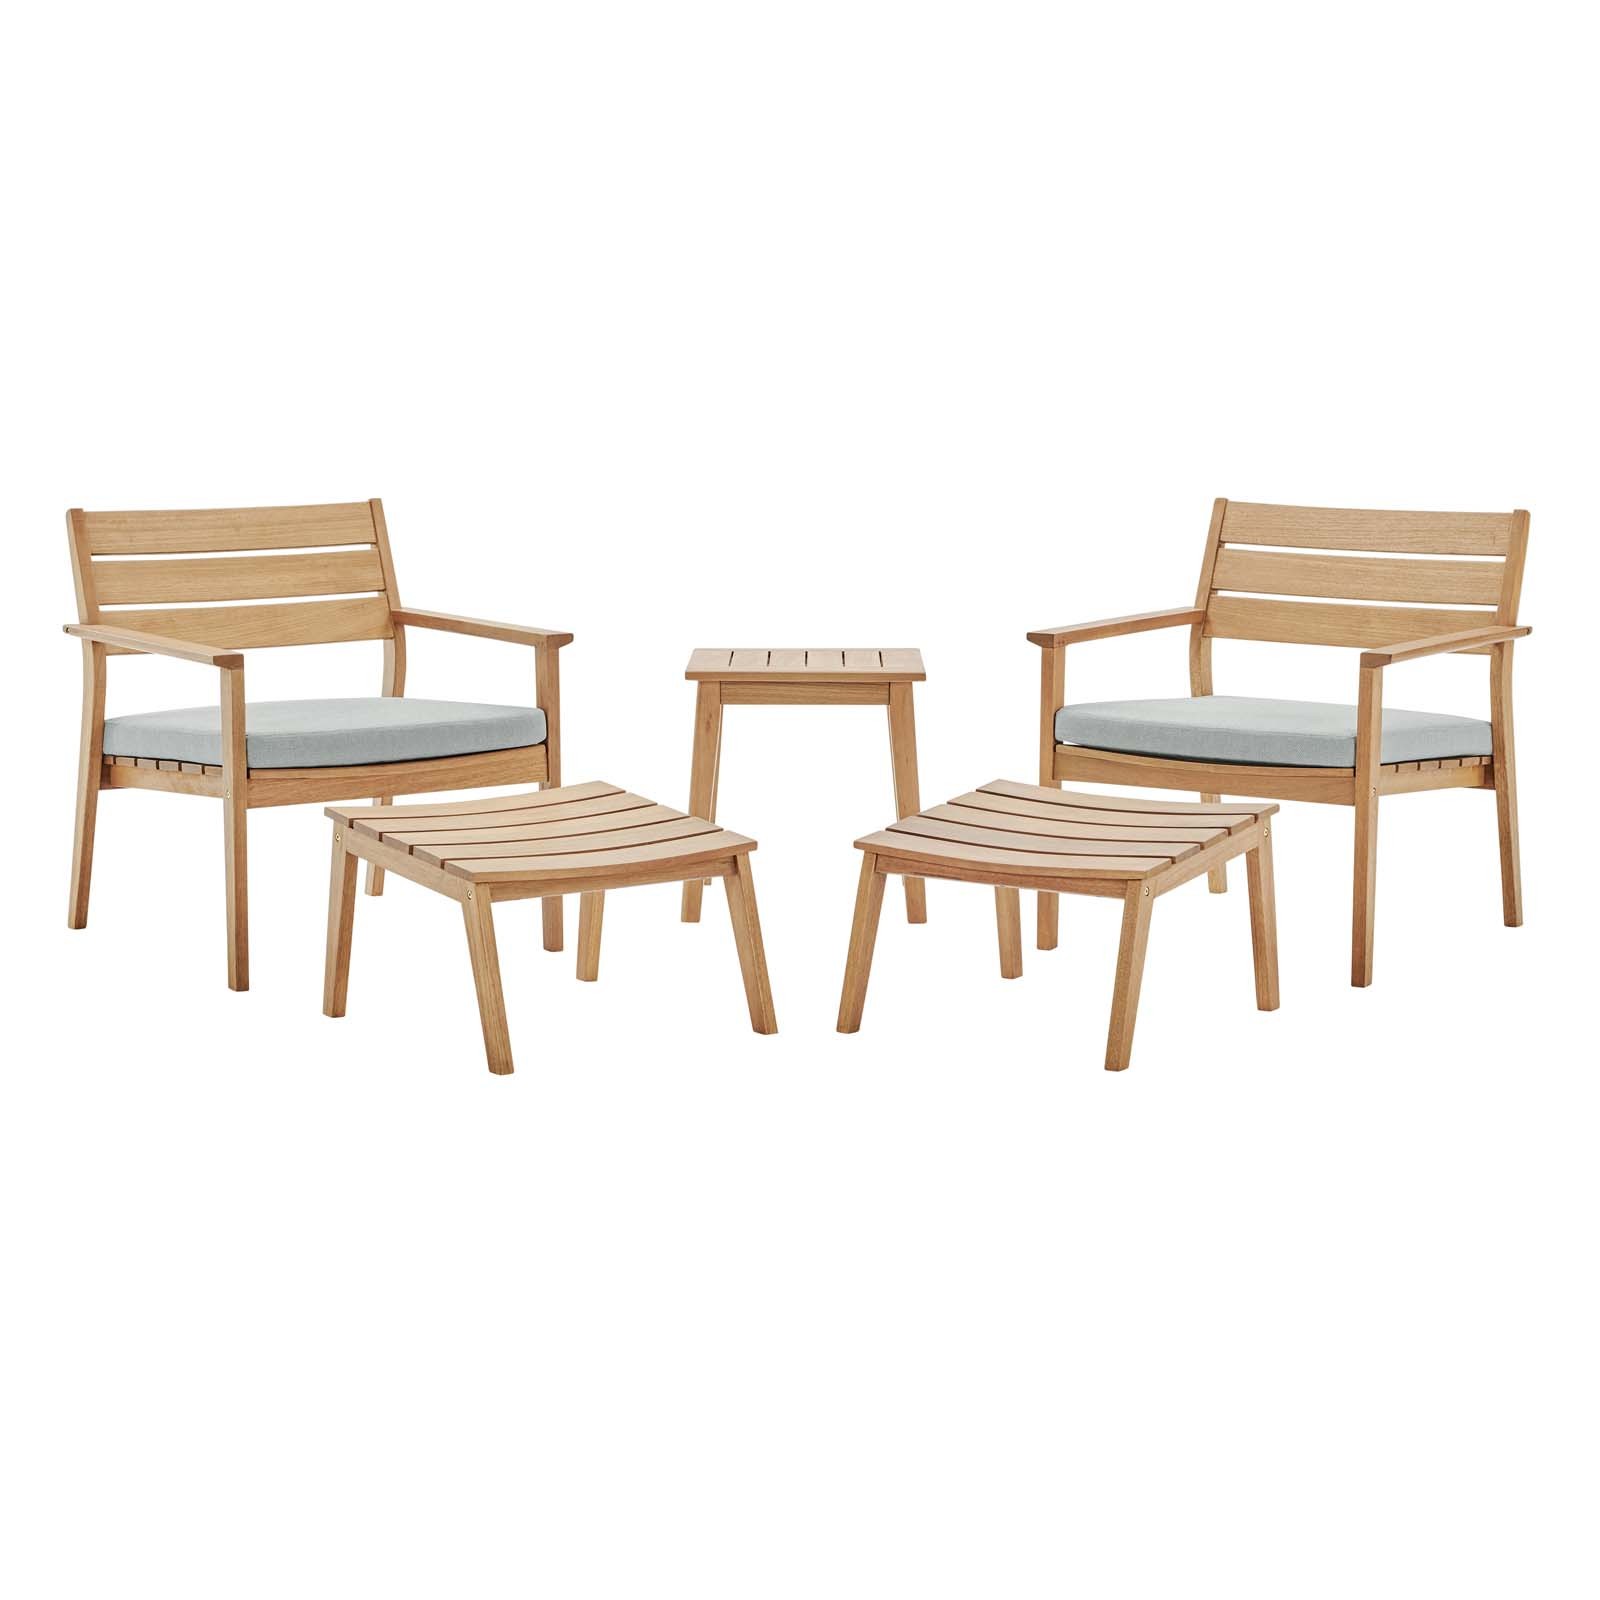 Breton 5 Piece Outdoor Patio Ash Wood Set in Natural Taupe